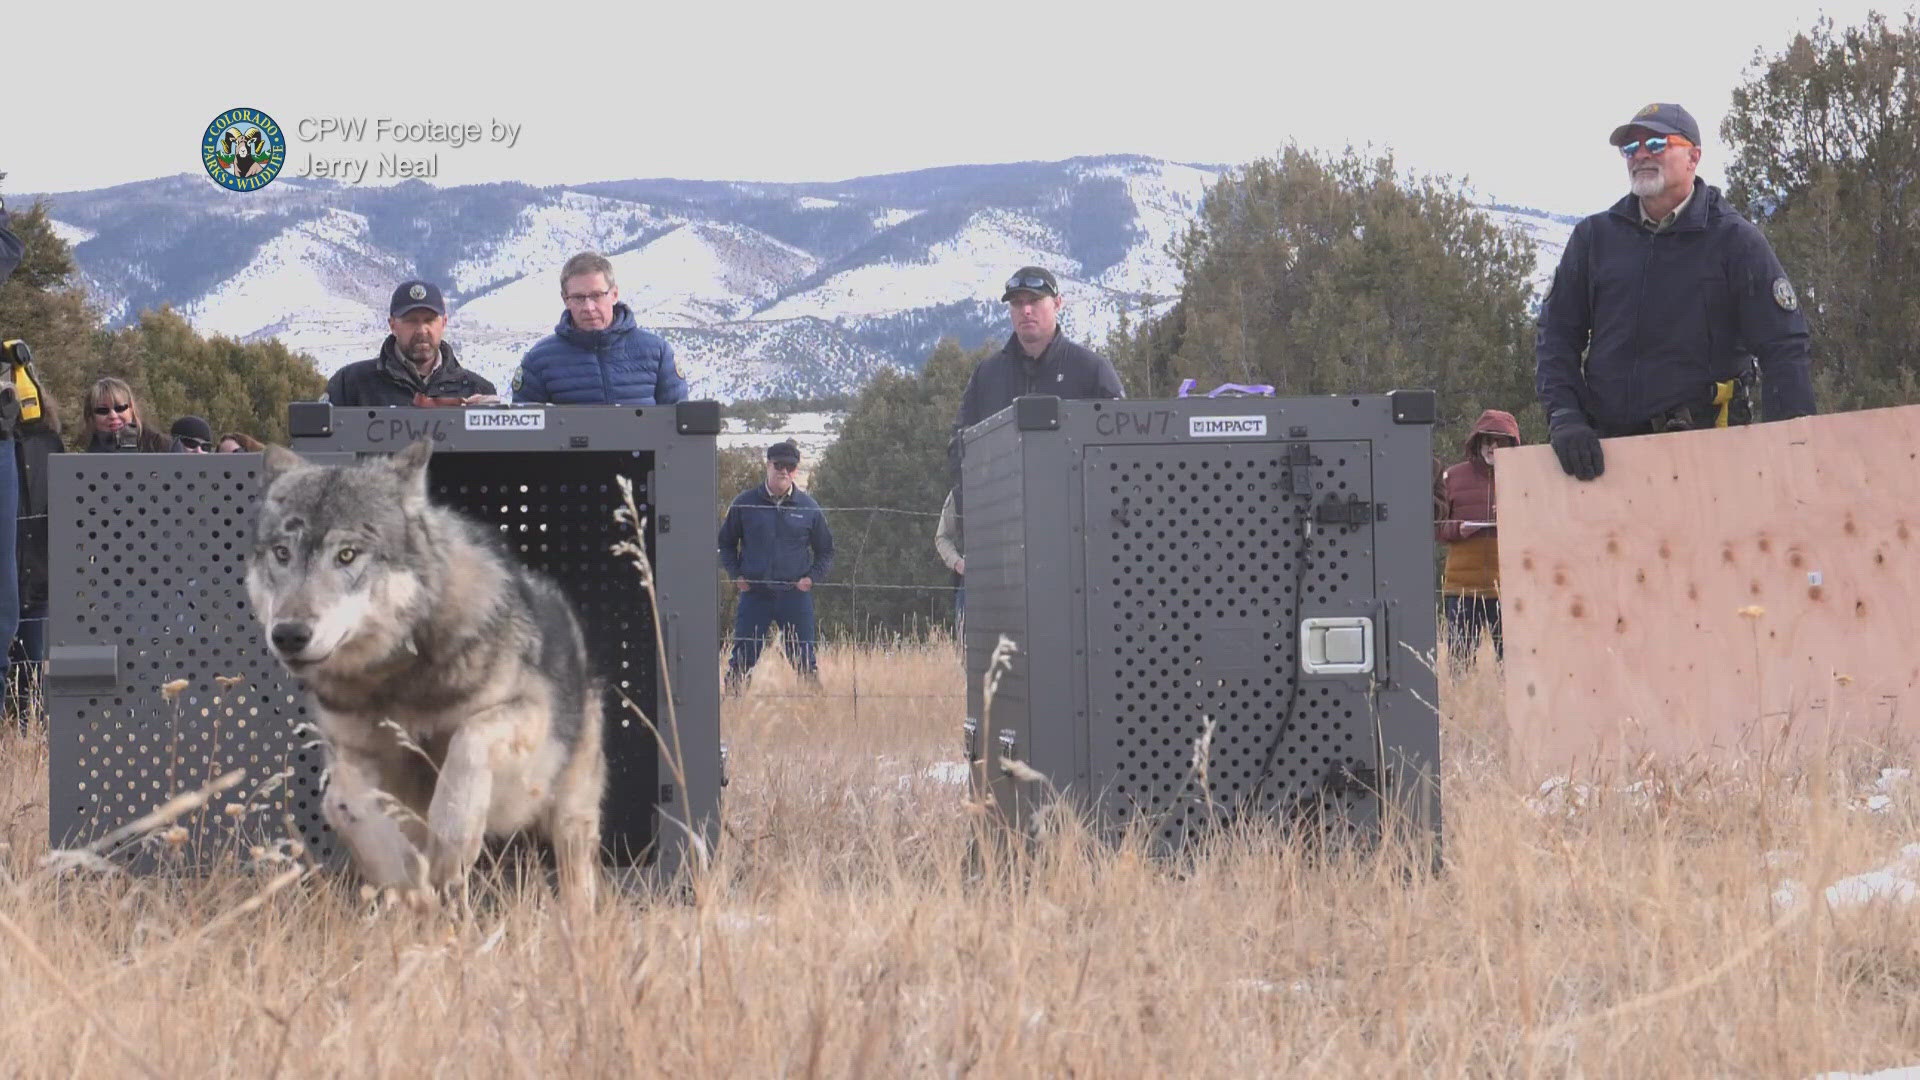 CPW said they identified the wolf as part of the group brought to Colorado from Oregon.